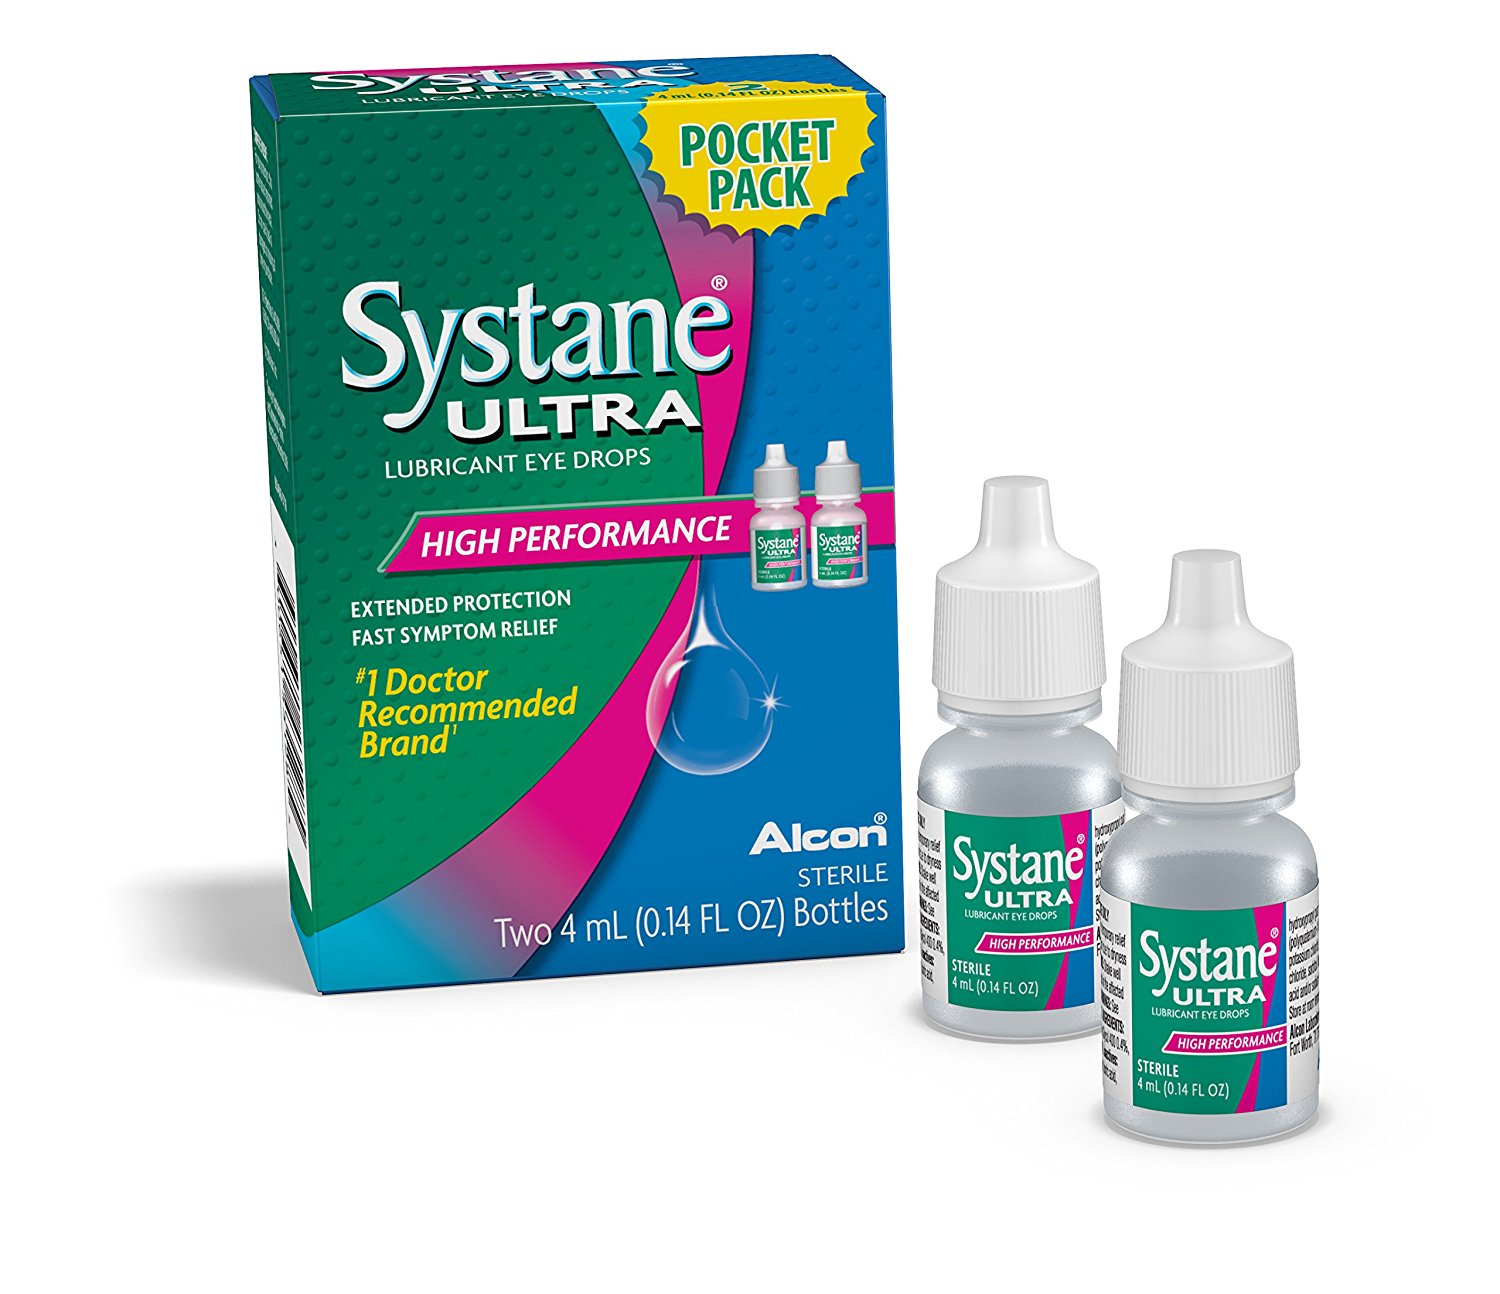 Amazon.com : Systane Ultra Eye Drops Lubricant High Performance, Two ...